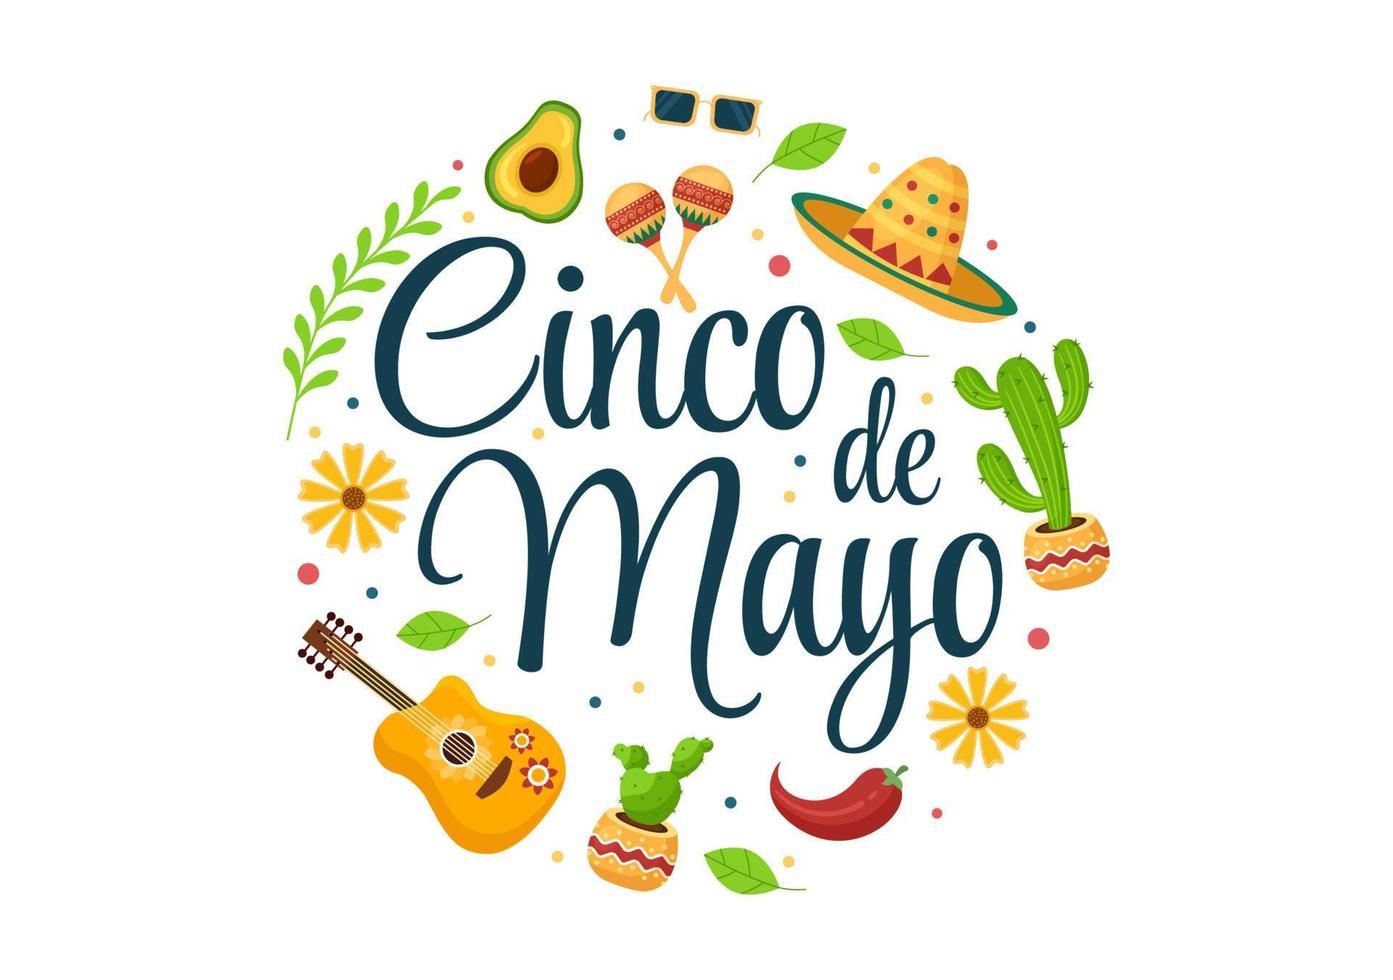 Cinco de Mayo Mexican Holiday Celebration Cartoon Style Illustration with Cactus, Guitar, Sombrero and Drinking Tequila for Poster or Greeting Card vector